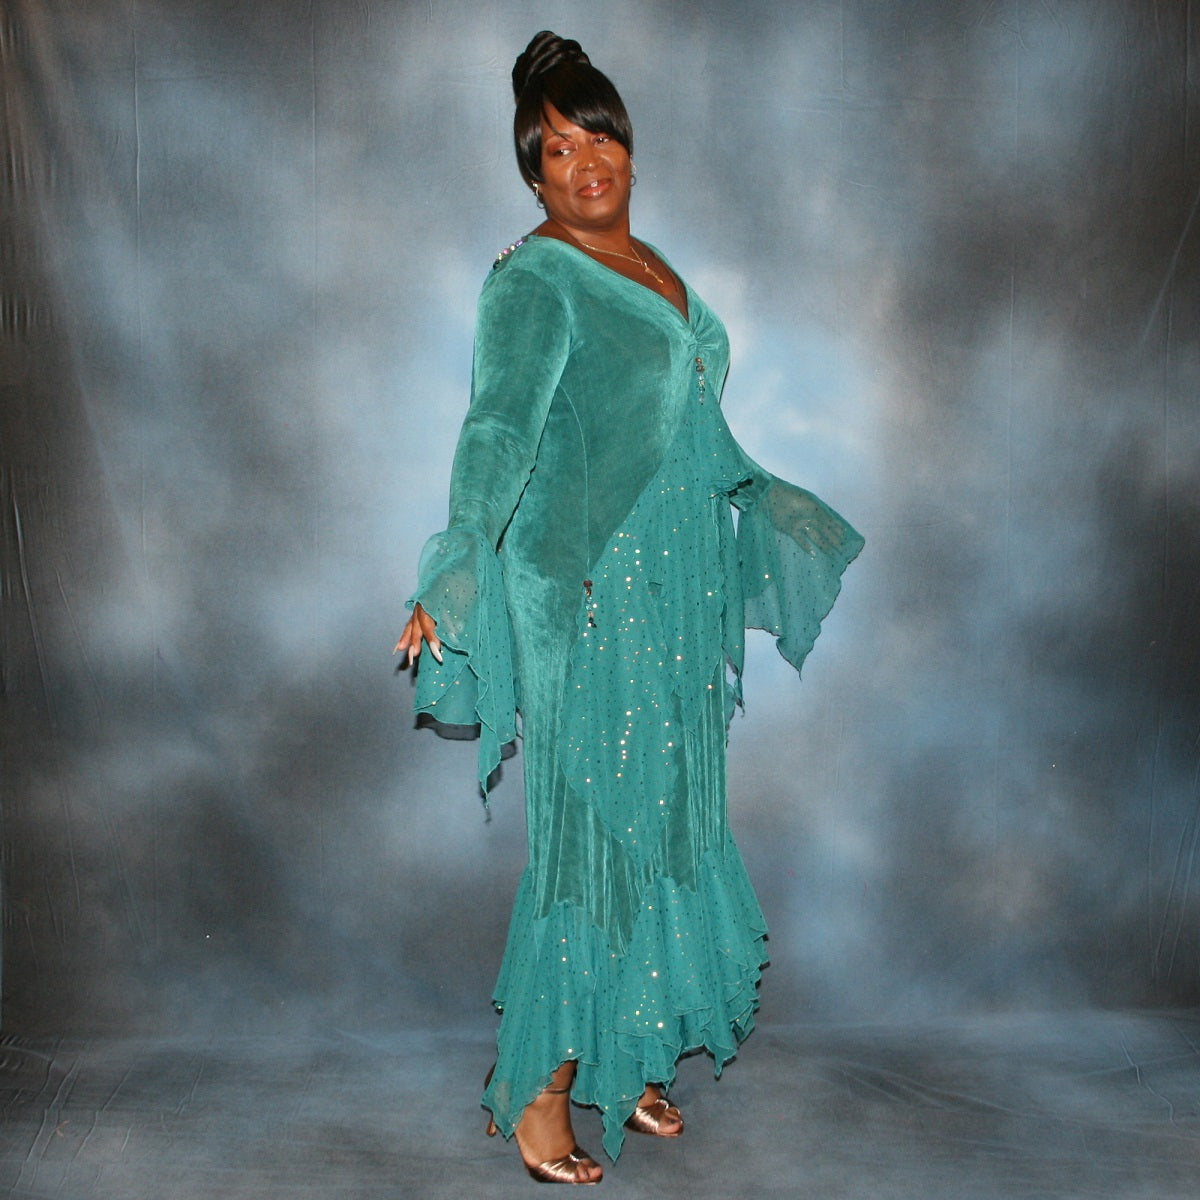 side view of Teal plus size ballroom dance dress was created in luxurious teal solid slinky with oodles of champagne sequined chiffon flounces & floats, embellished with a lovely touch of Swarovski hand beading.